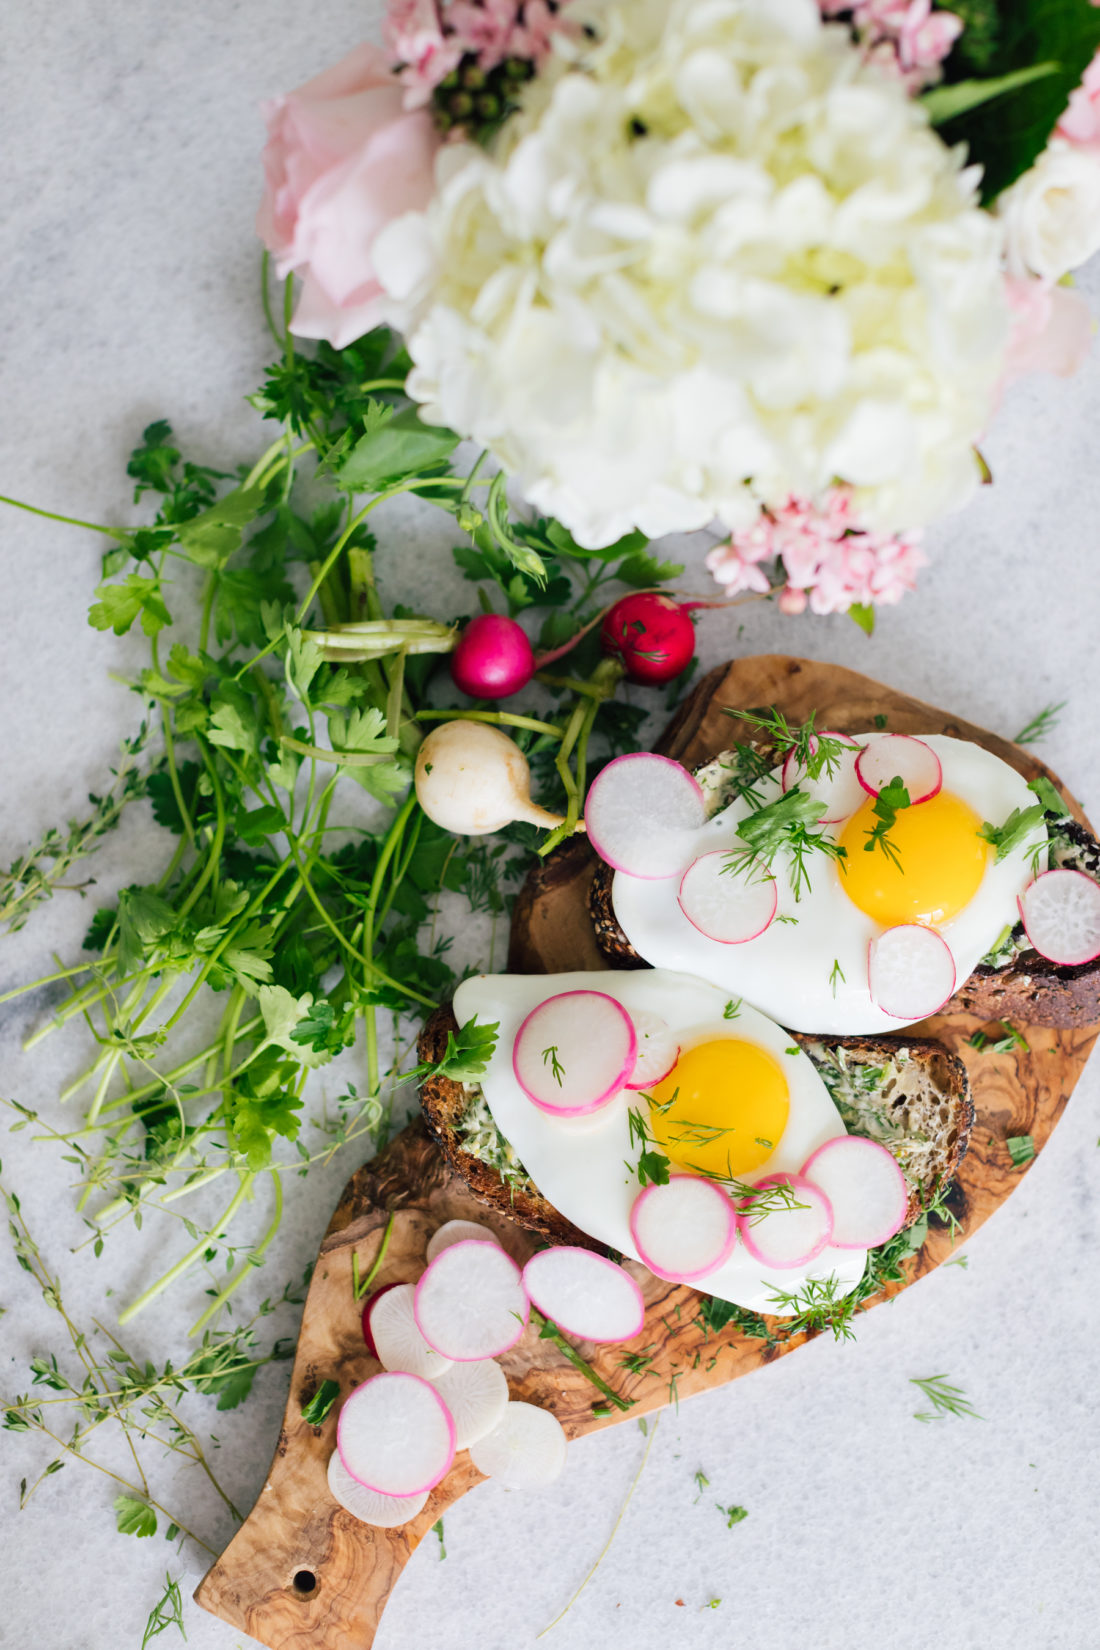 Eva Amurri Martino of Happily Eva After shares her recipe for Egg Toasts for Mother's Day Brunch